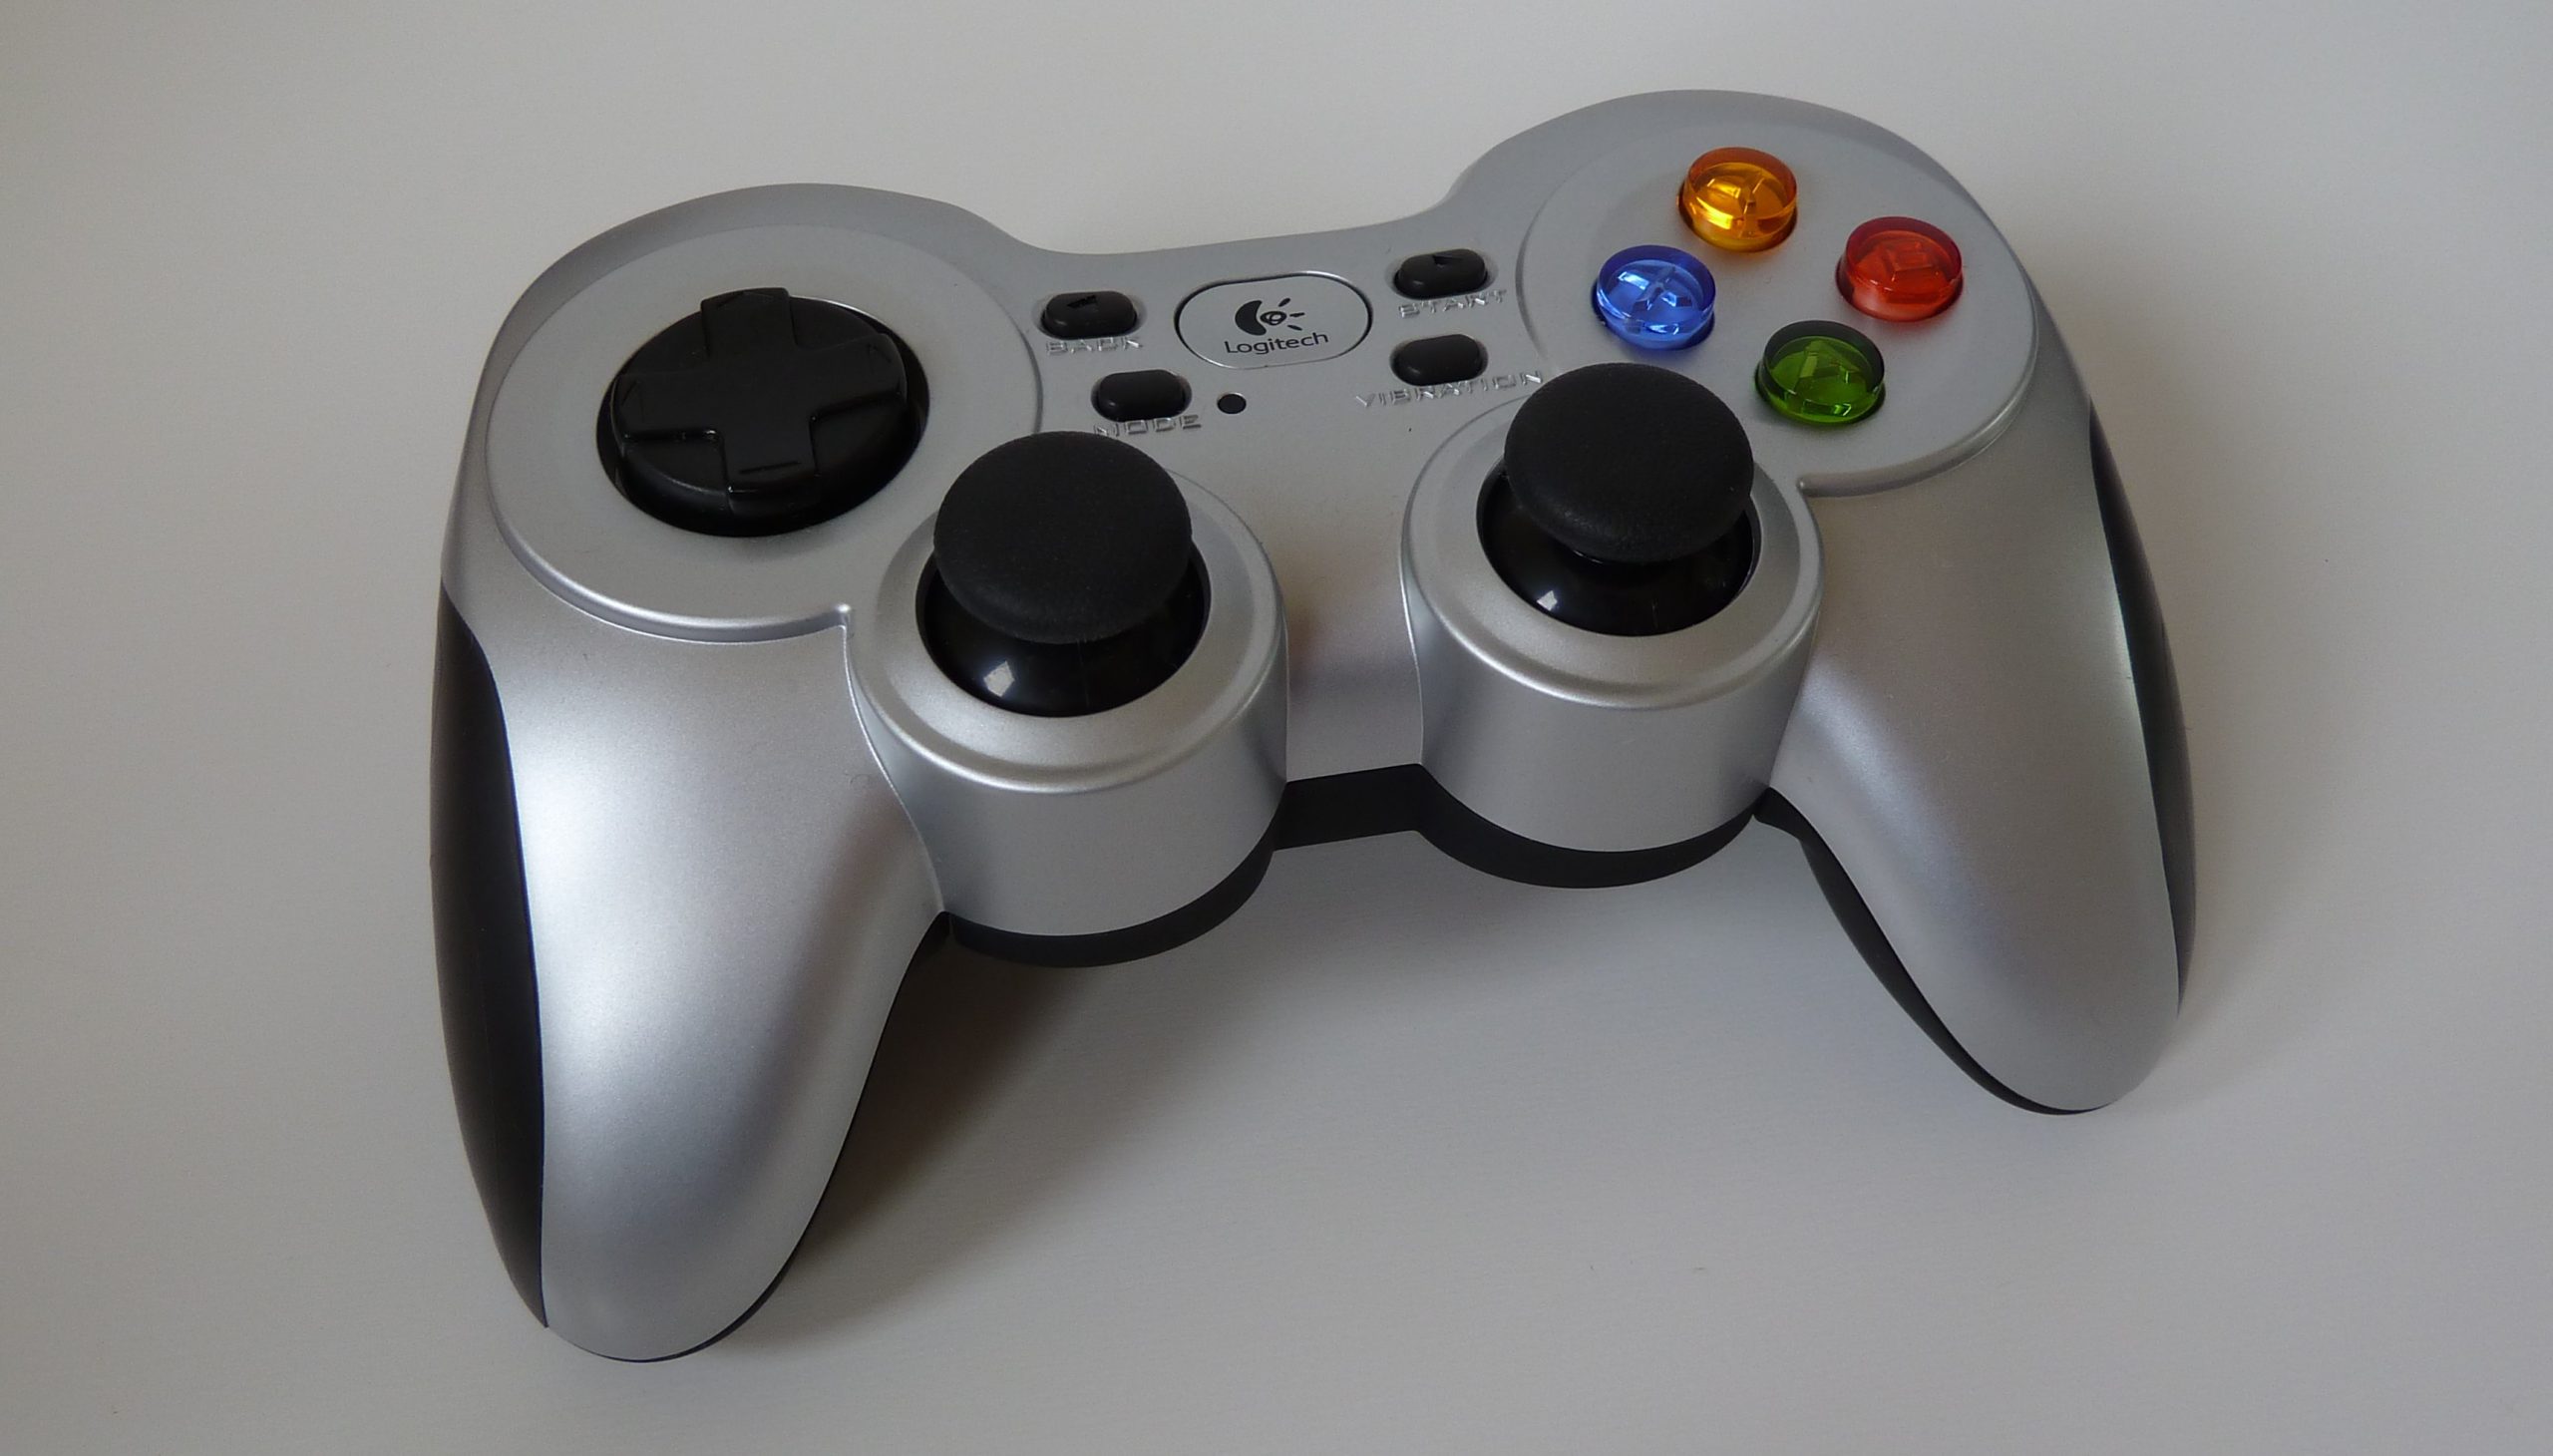 Desillusie Dictatuur Bedankt How to Set-Up & Use Your Xbox 360 Controller on Linux